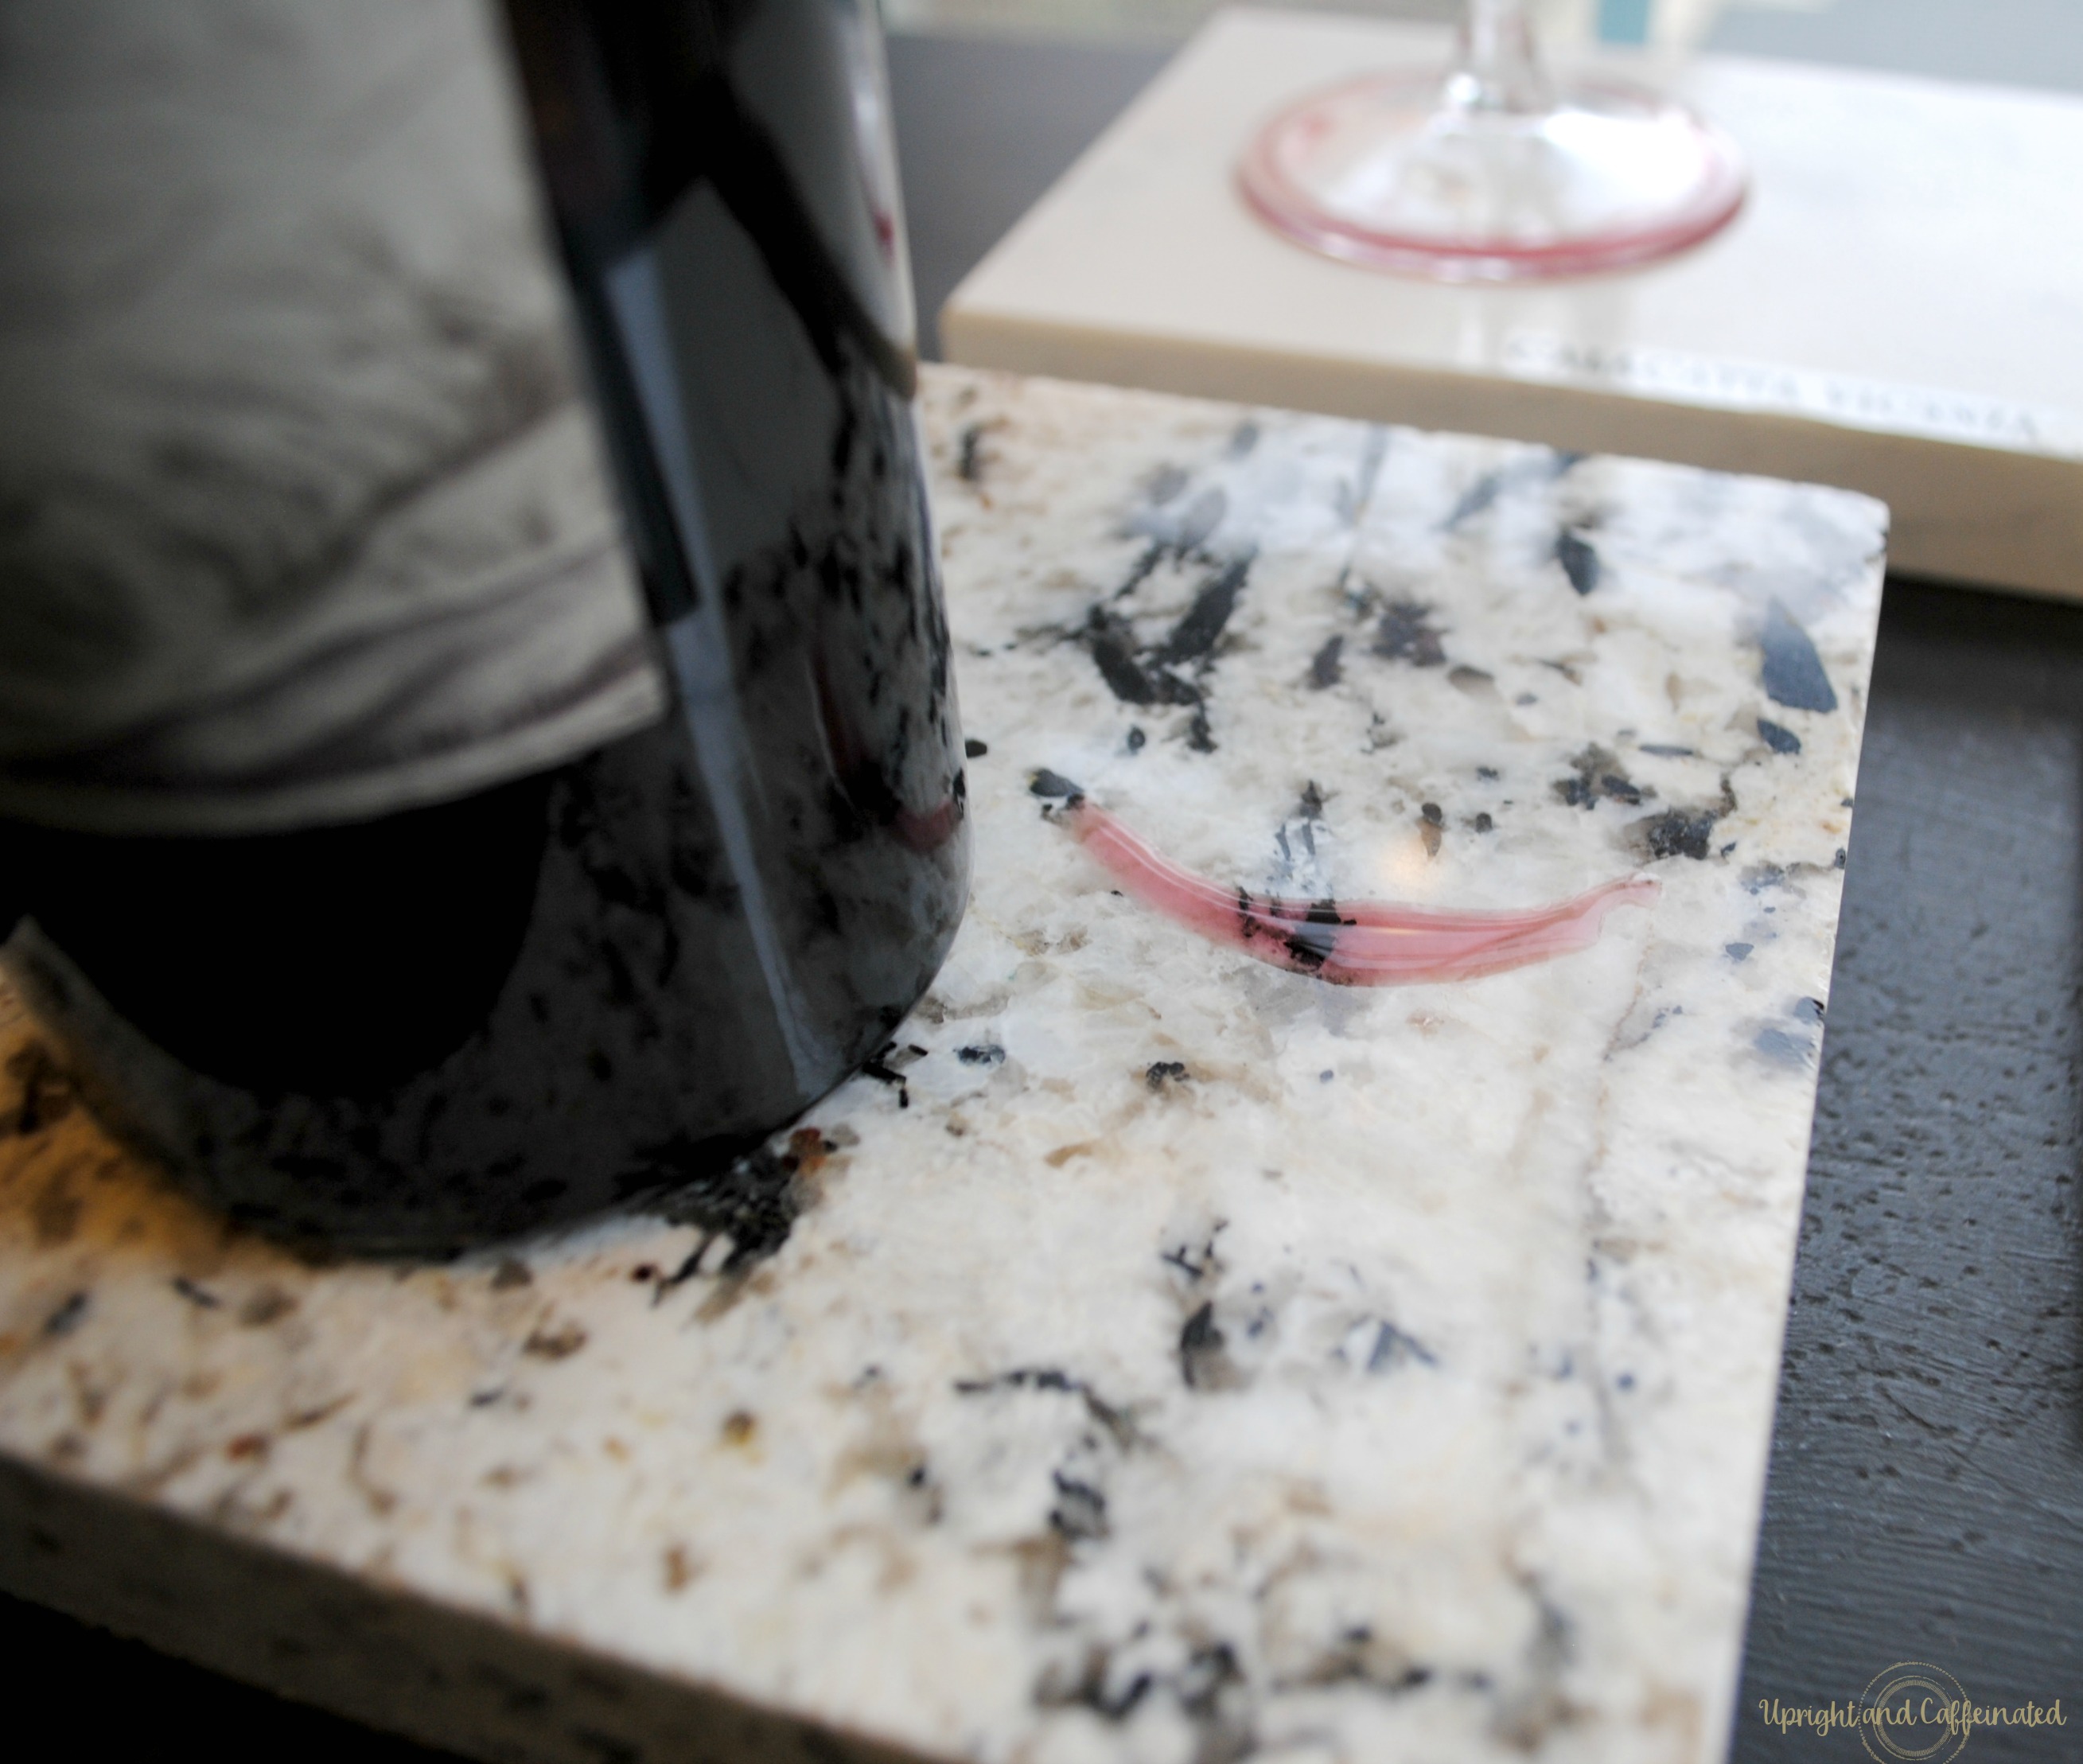 The most comprehensive comparison of the durability between quartz and granite counter tops. The ultimate test of quartz vs. granite! I was shocked to see the results of the wine test!